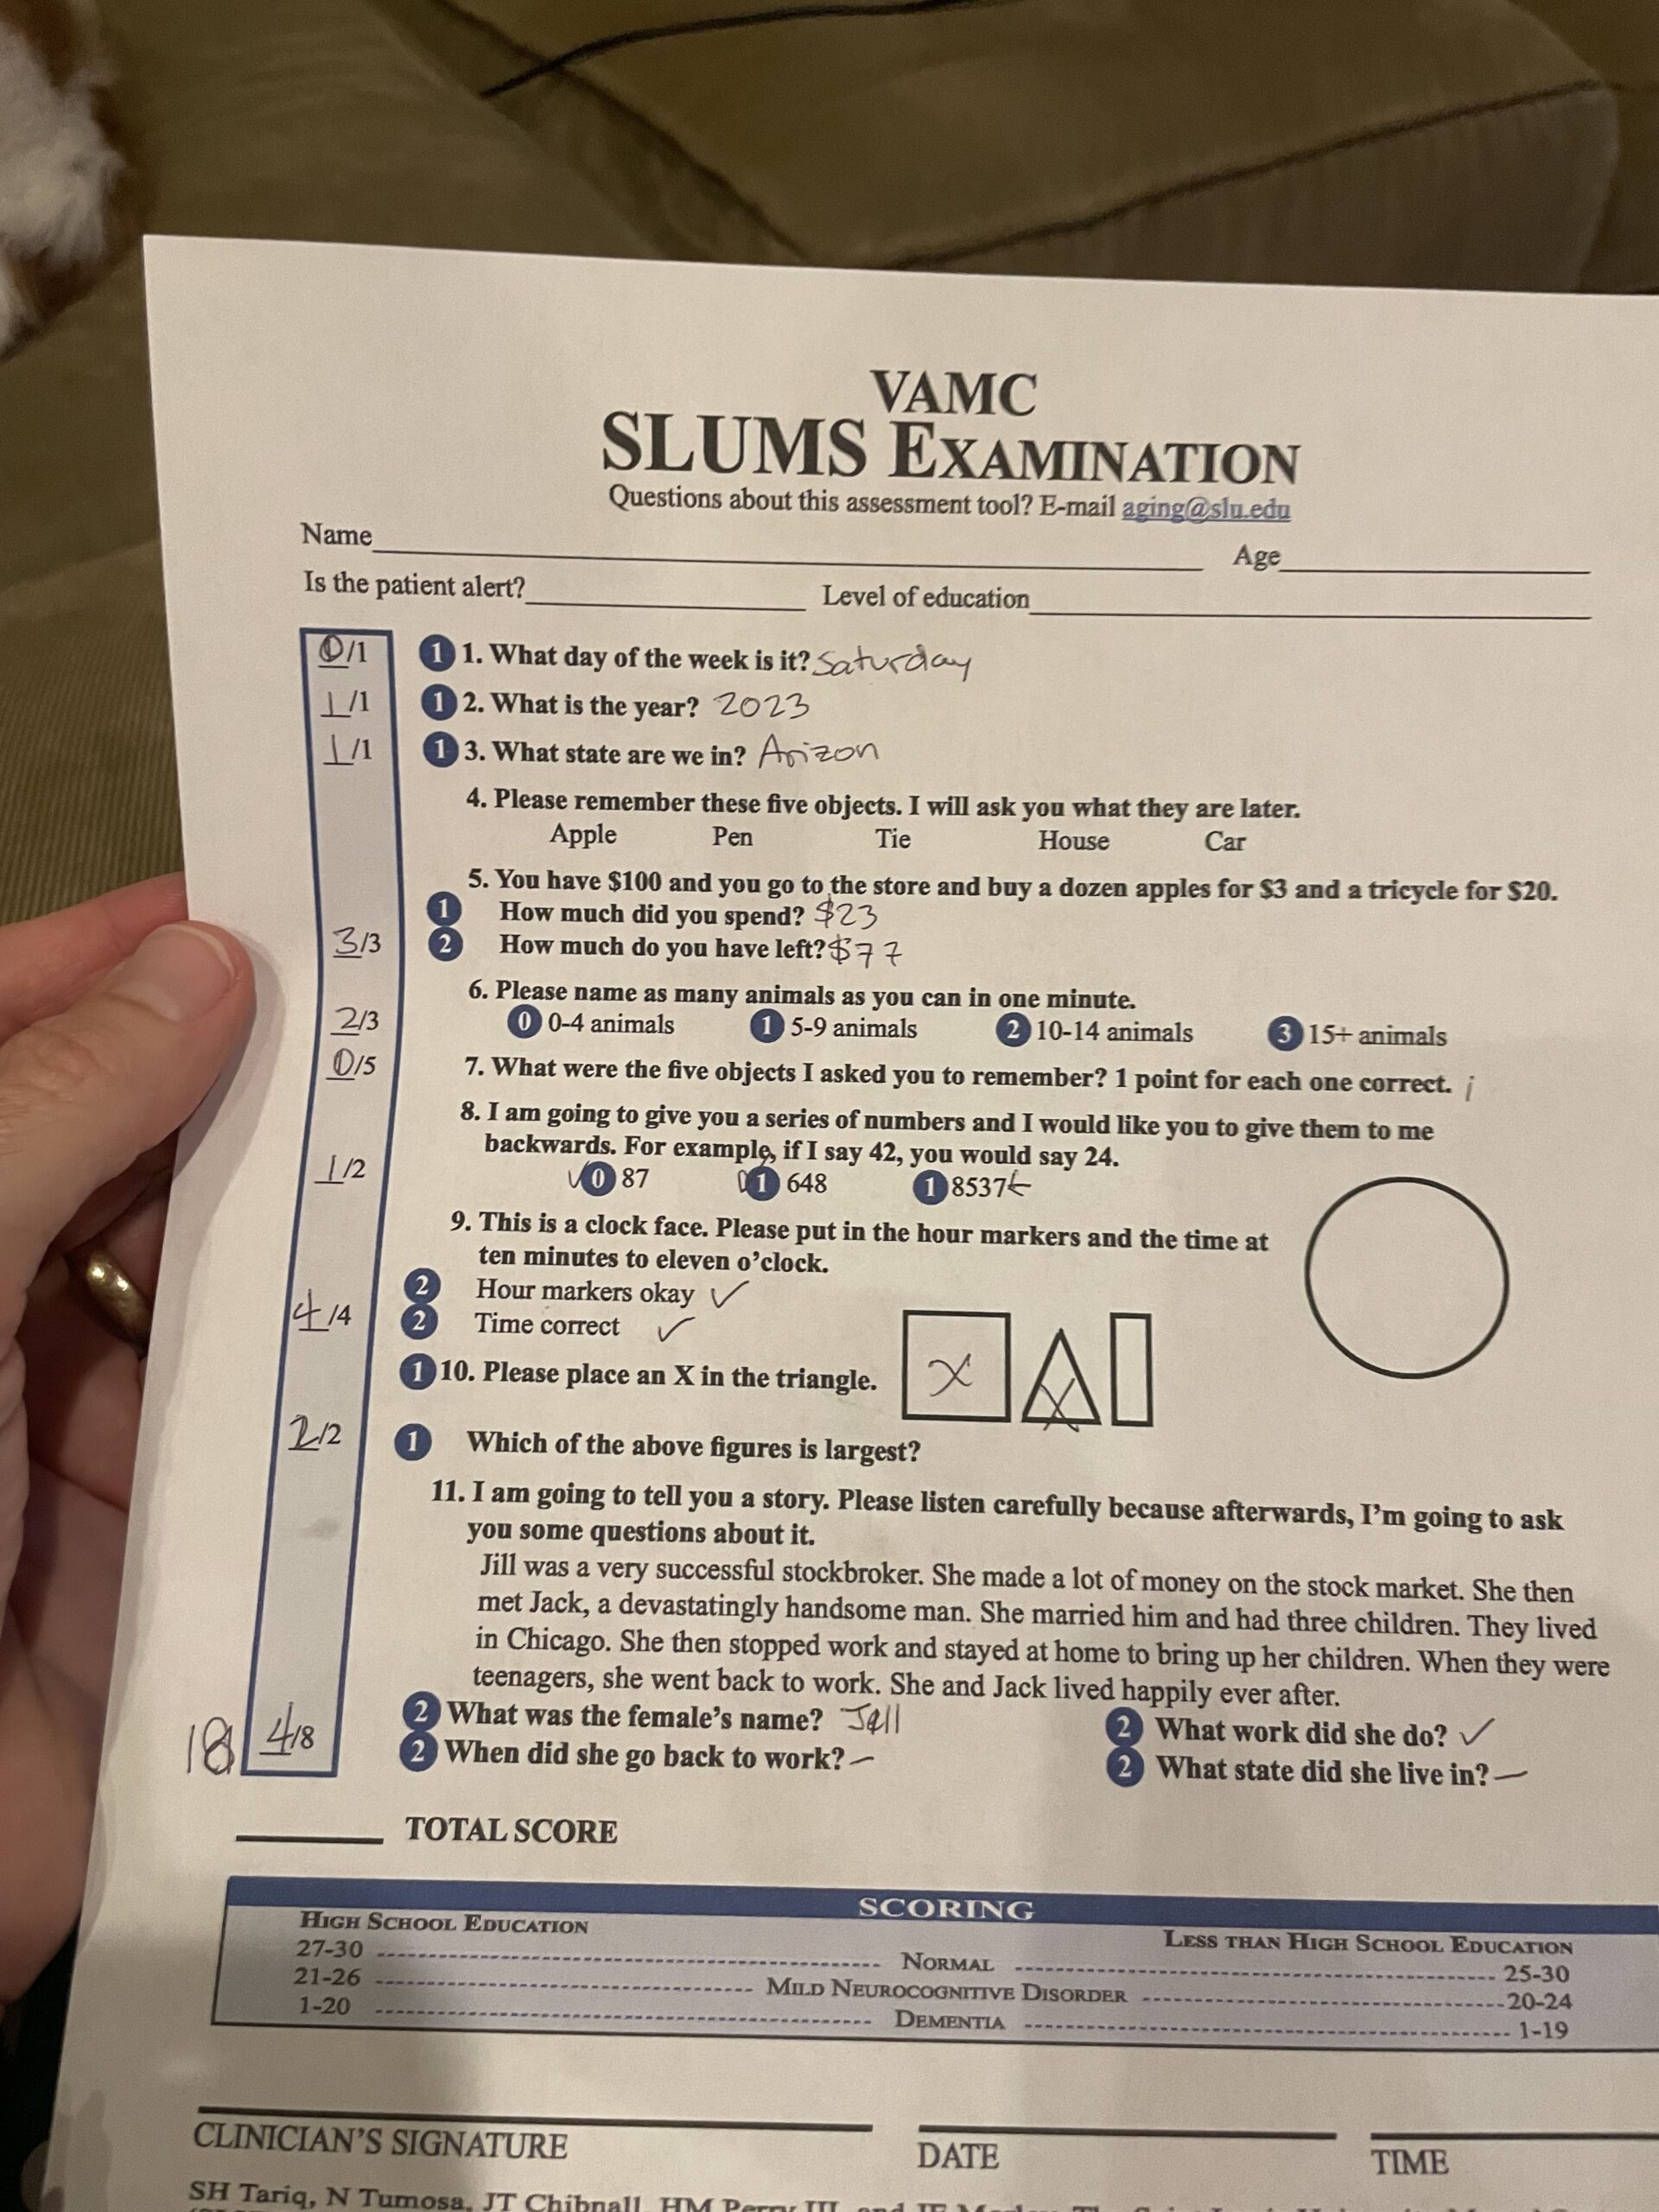 The results of a carnivore diet in assisted living - a better SLUMS test